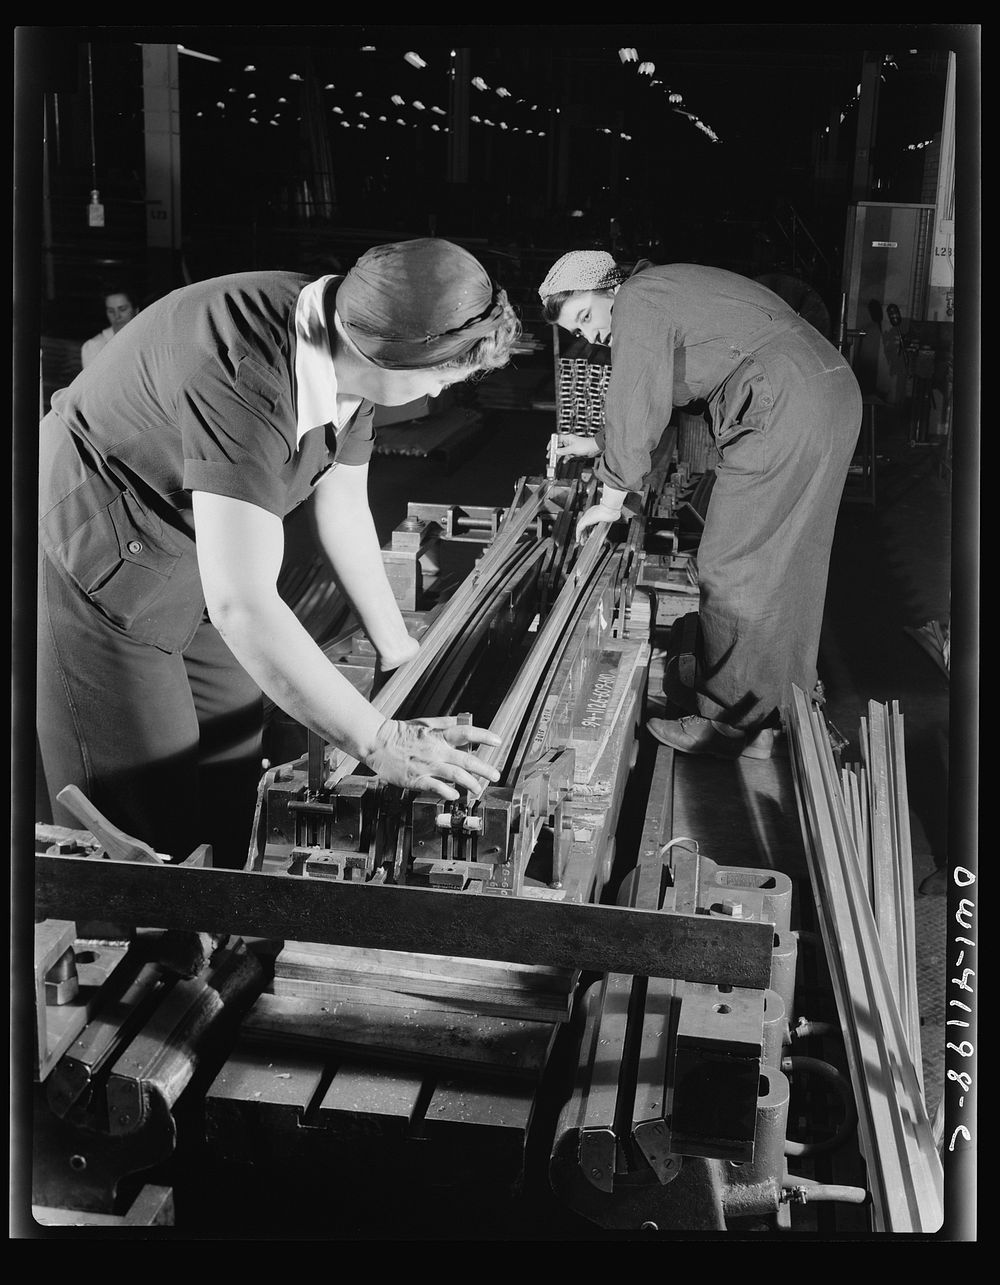 Boeing aircraft plant, Seattle, Washington. Production of B-17 (Flying Fortress) bombing planes. Two women working on a…